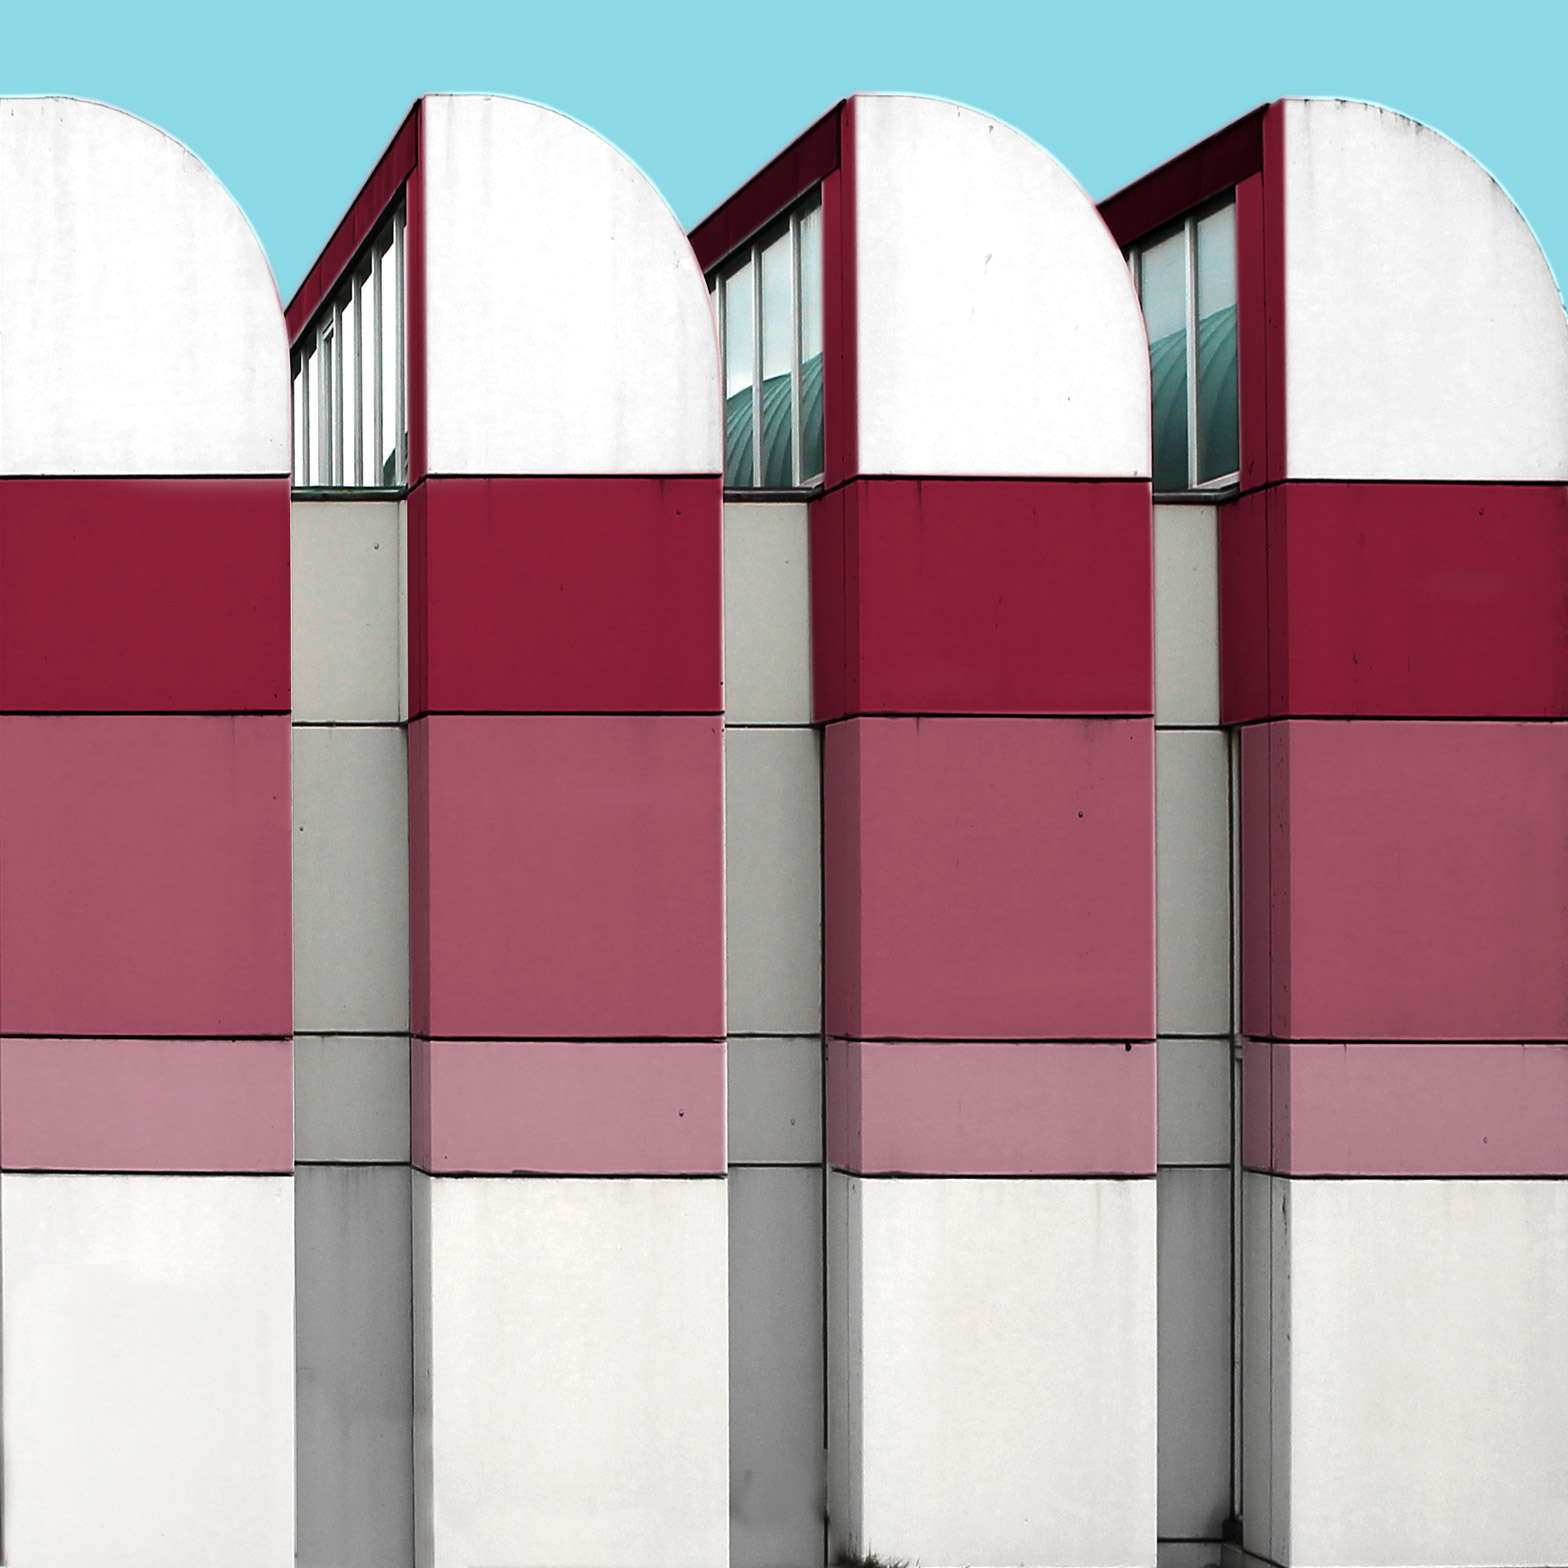 Colourful Berlin: Photography architecture essay by Paul Eis from Germany